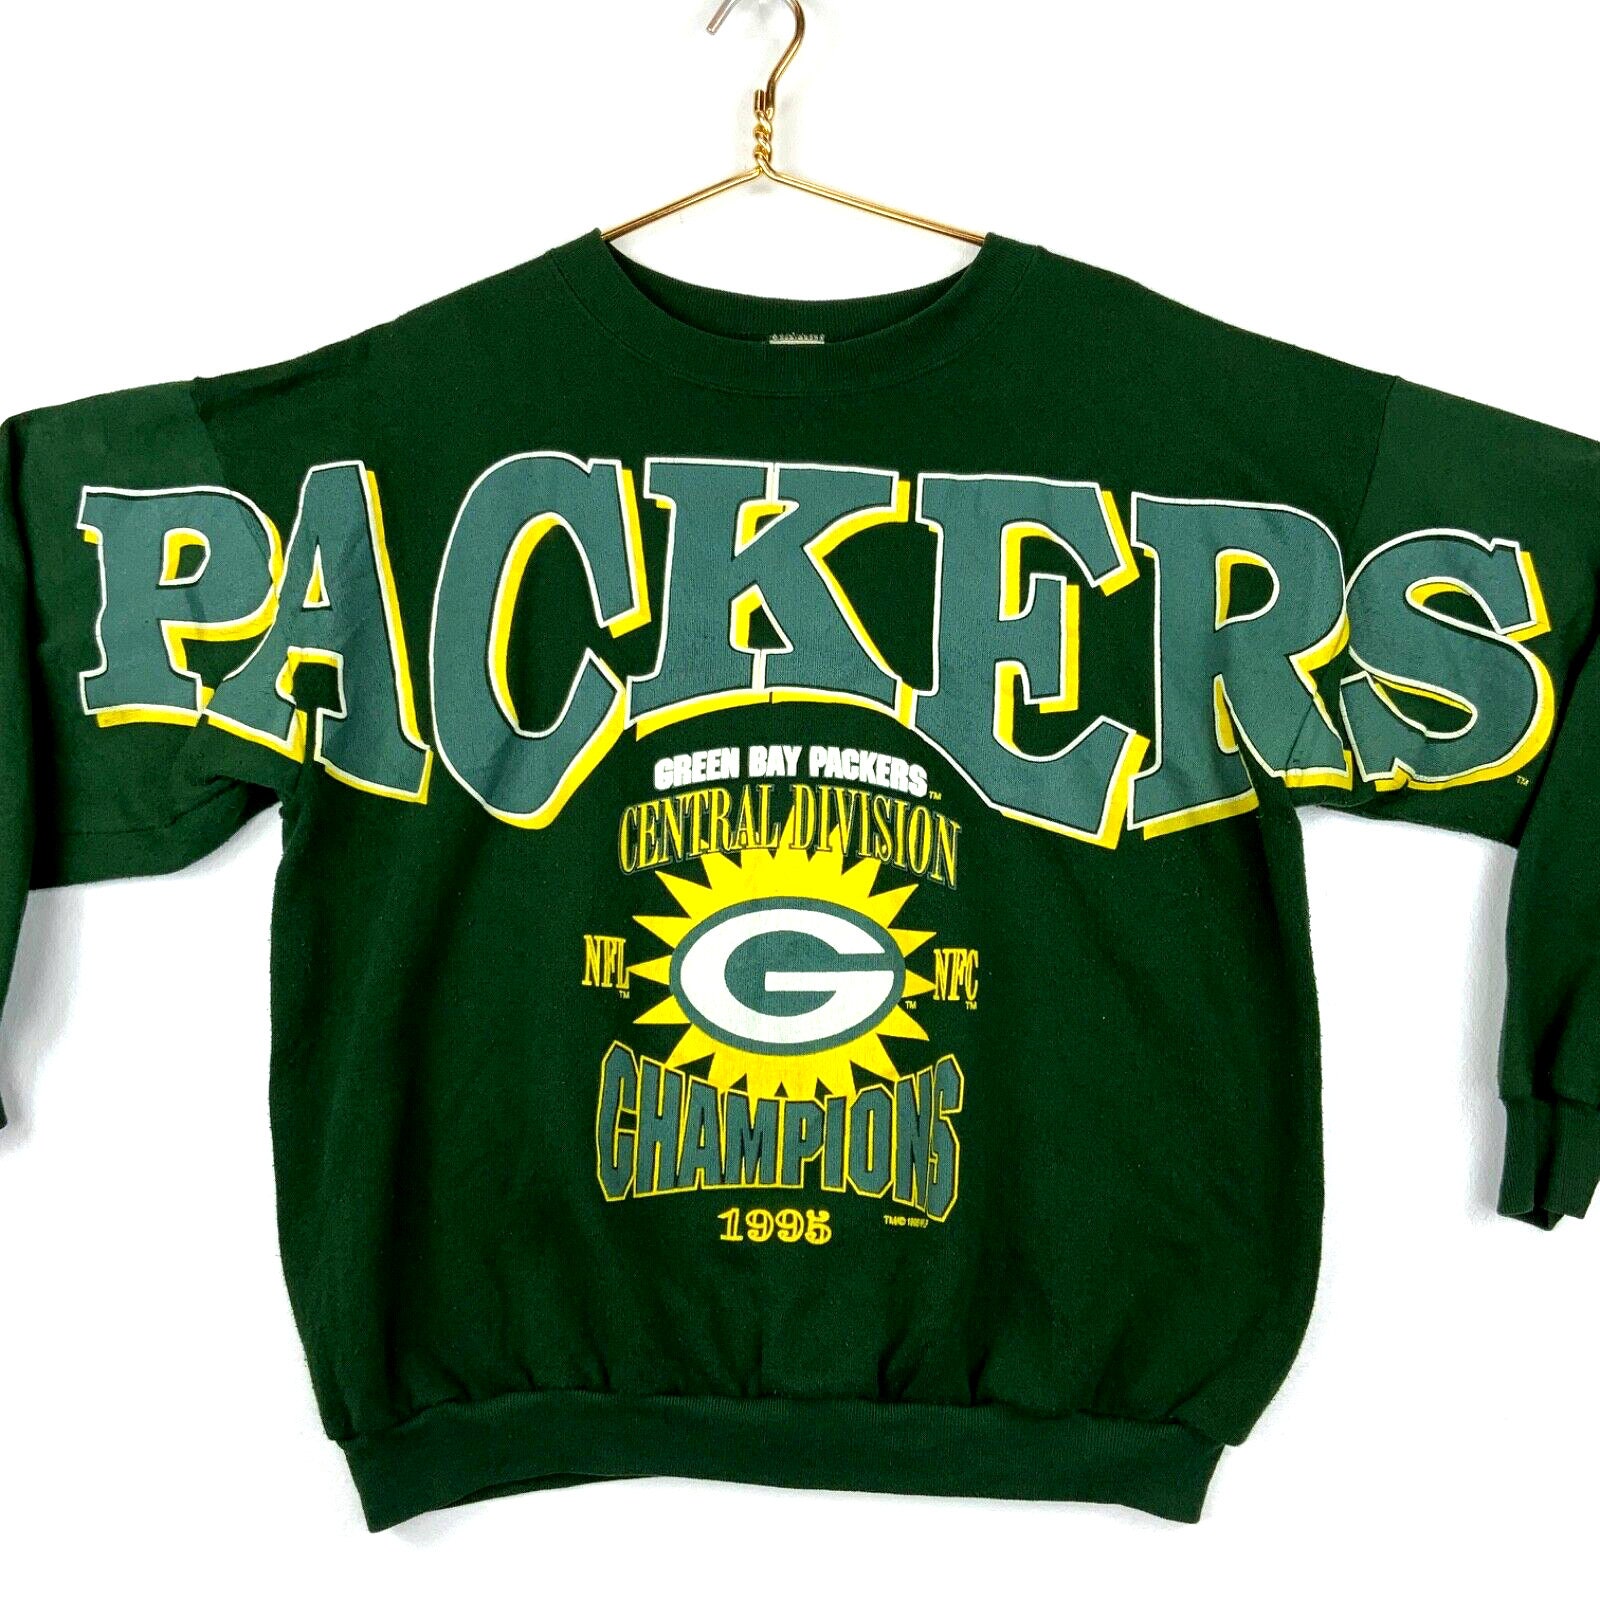 greenbay packers division